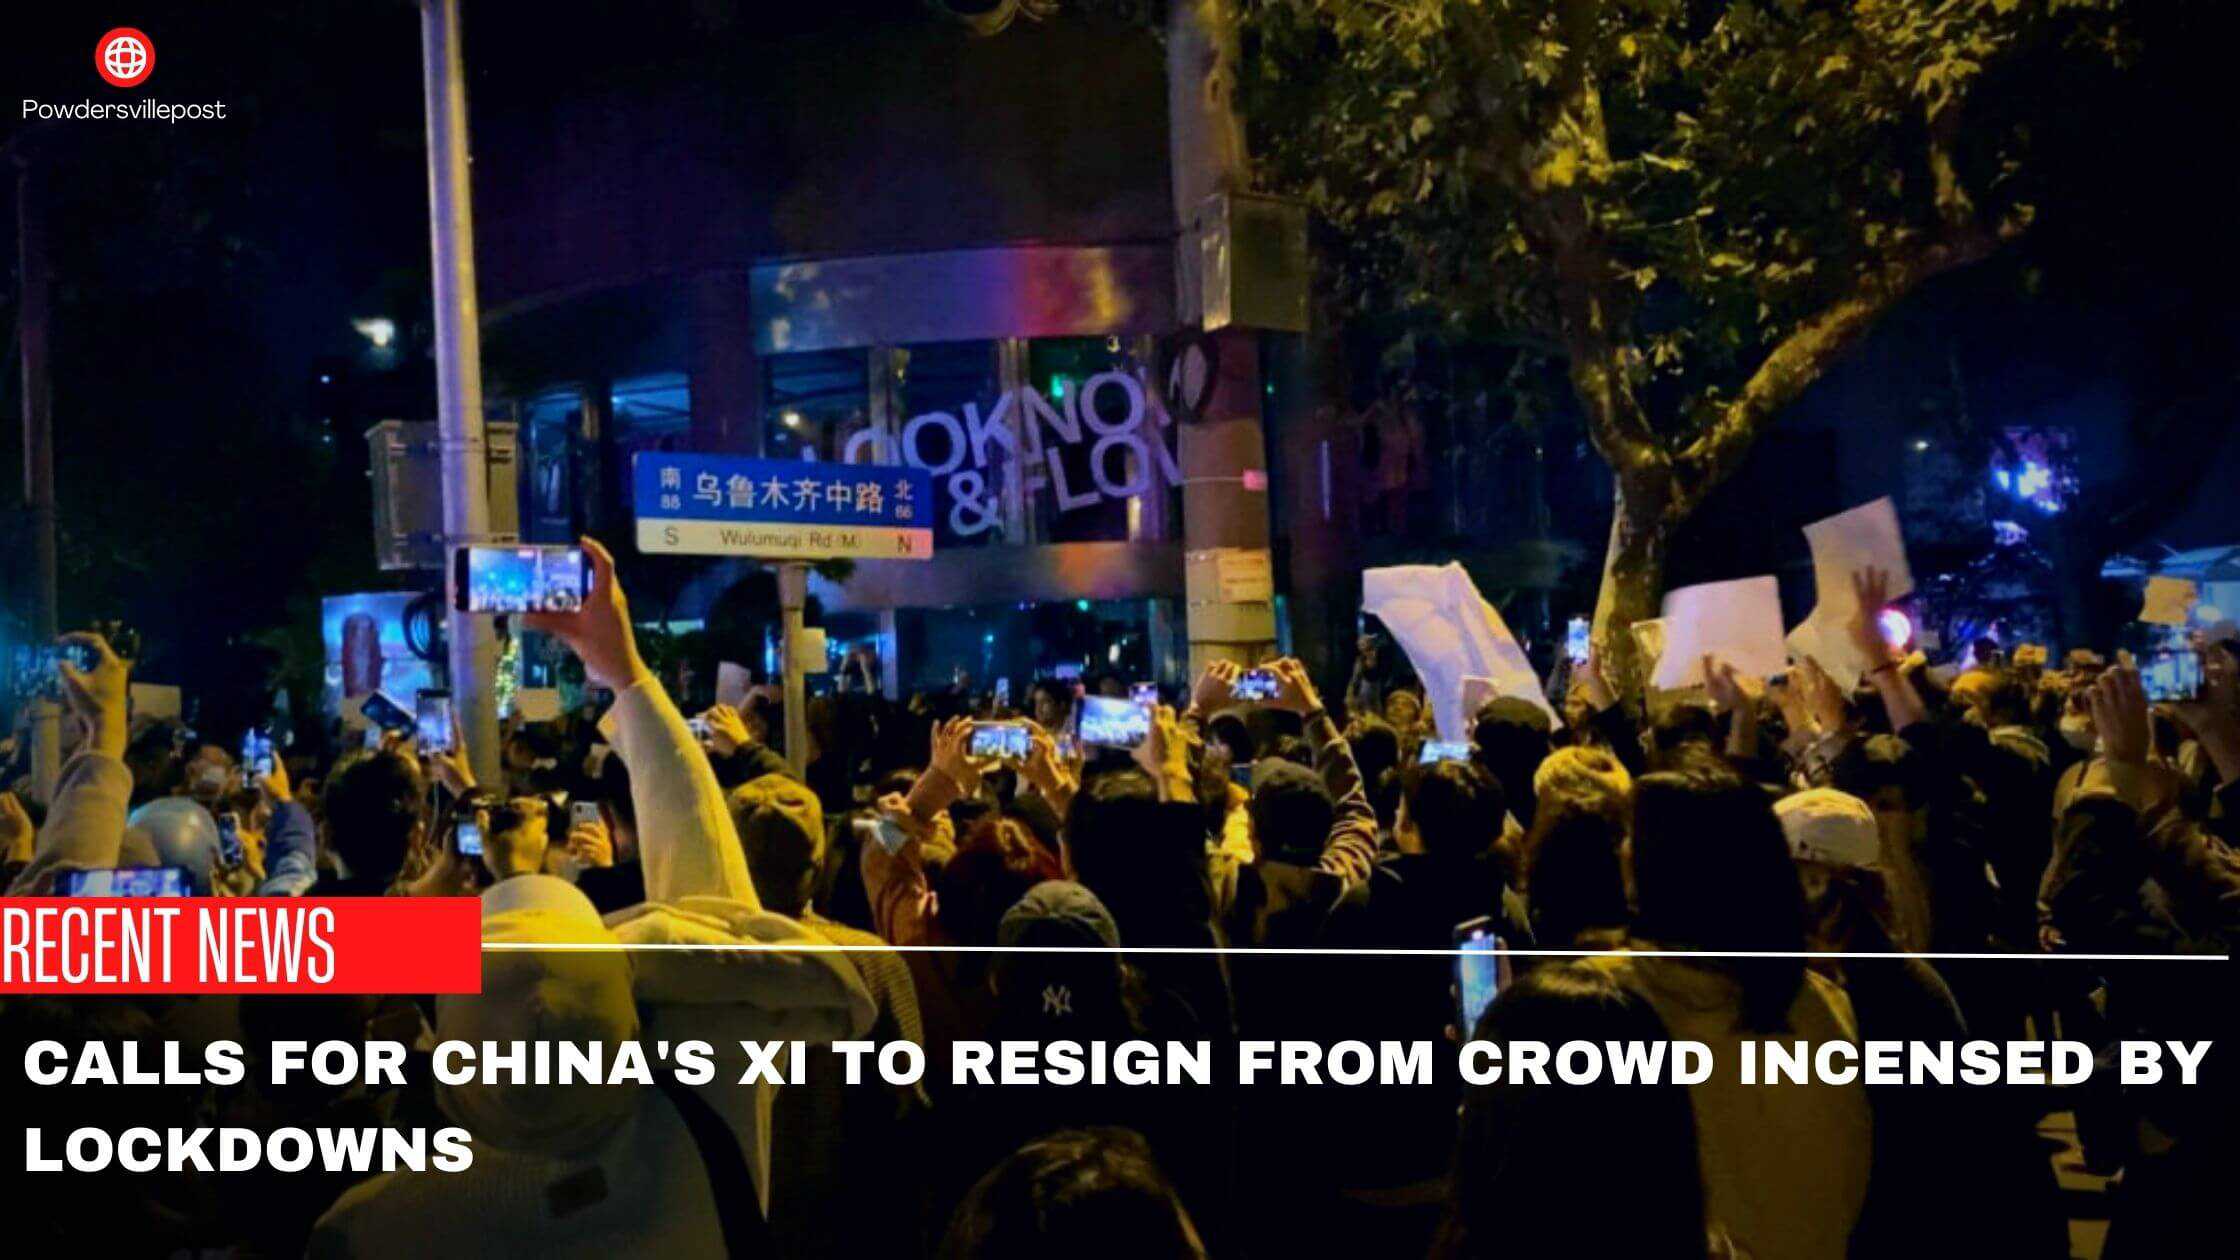 Calls For China's Xi To Resign From Crowd Incensed By Lockdowns